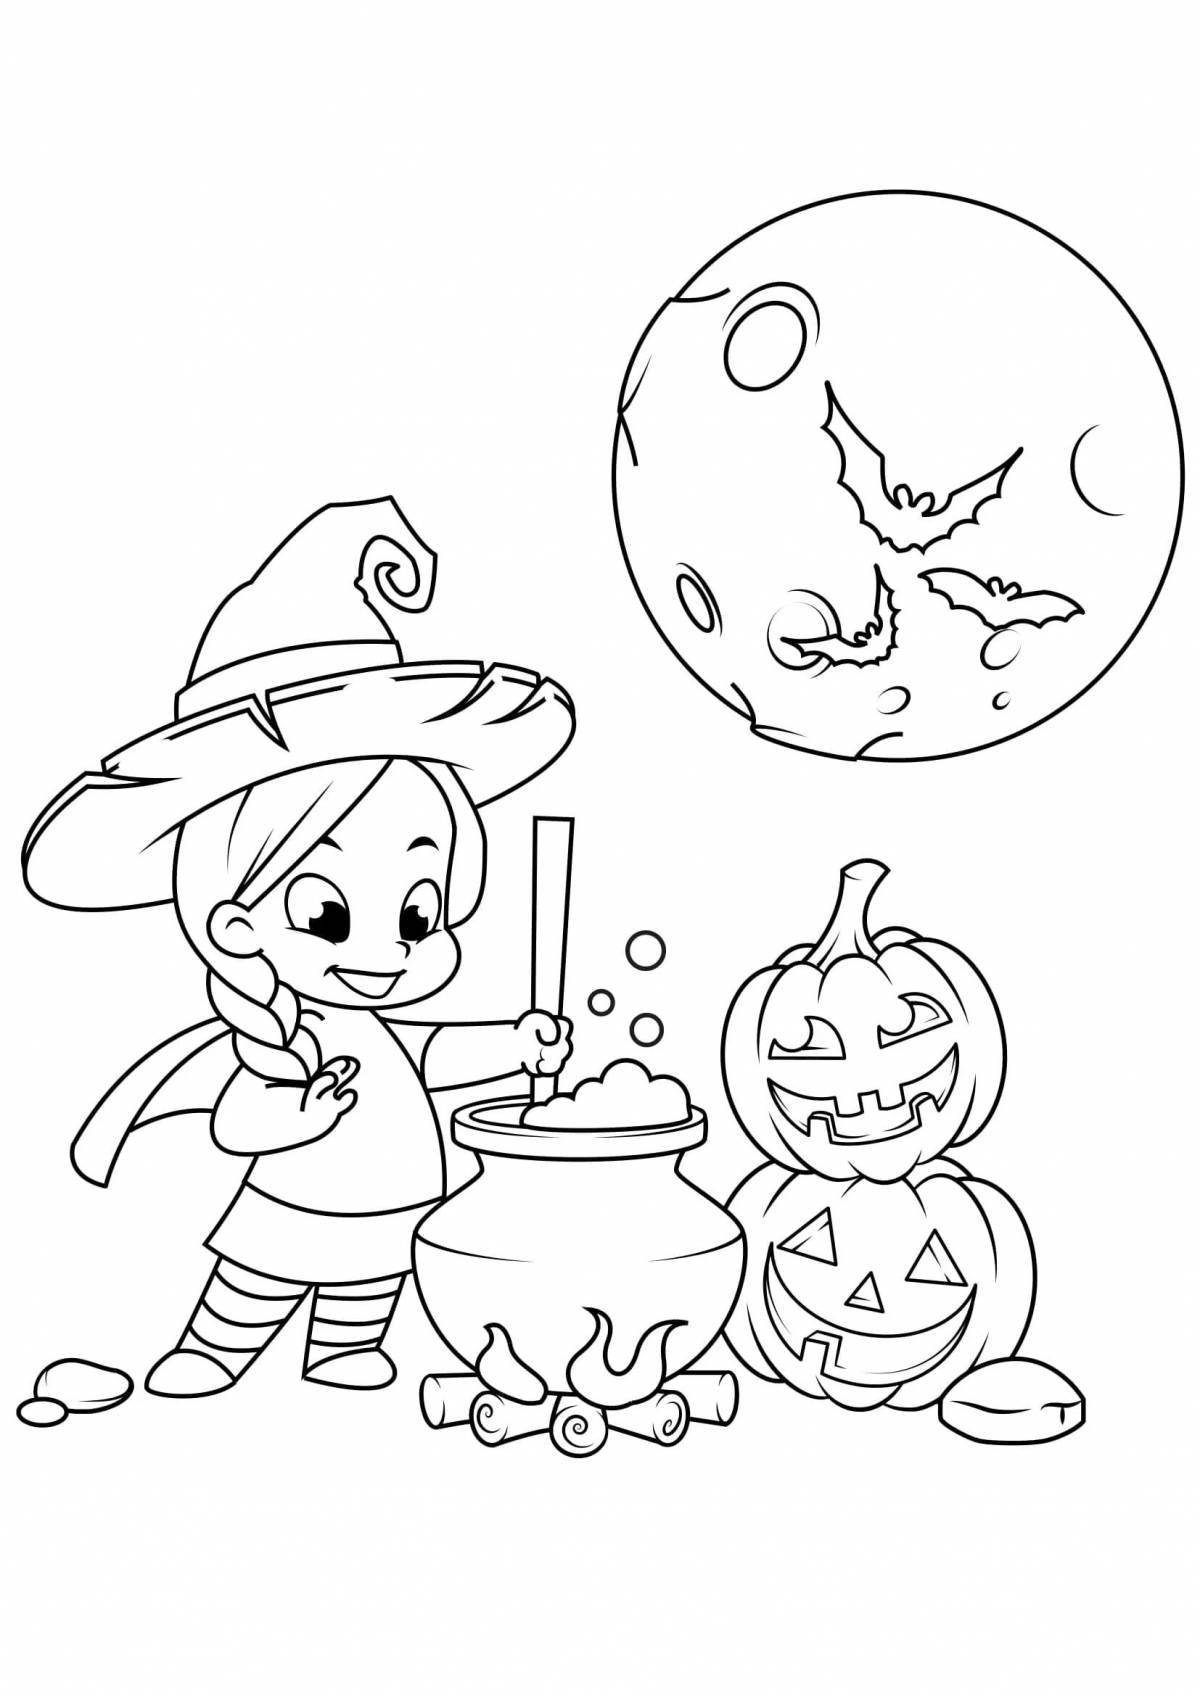 Dazzling aya and witch coloring book